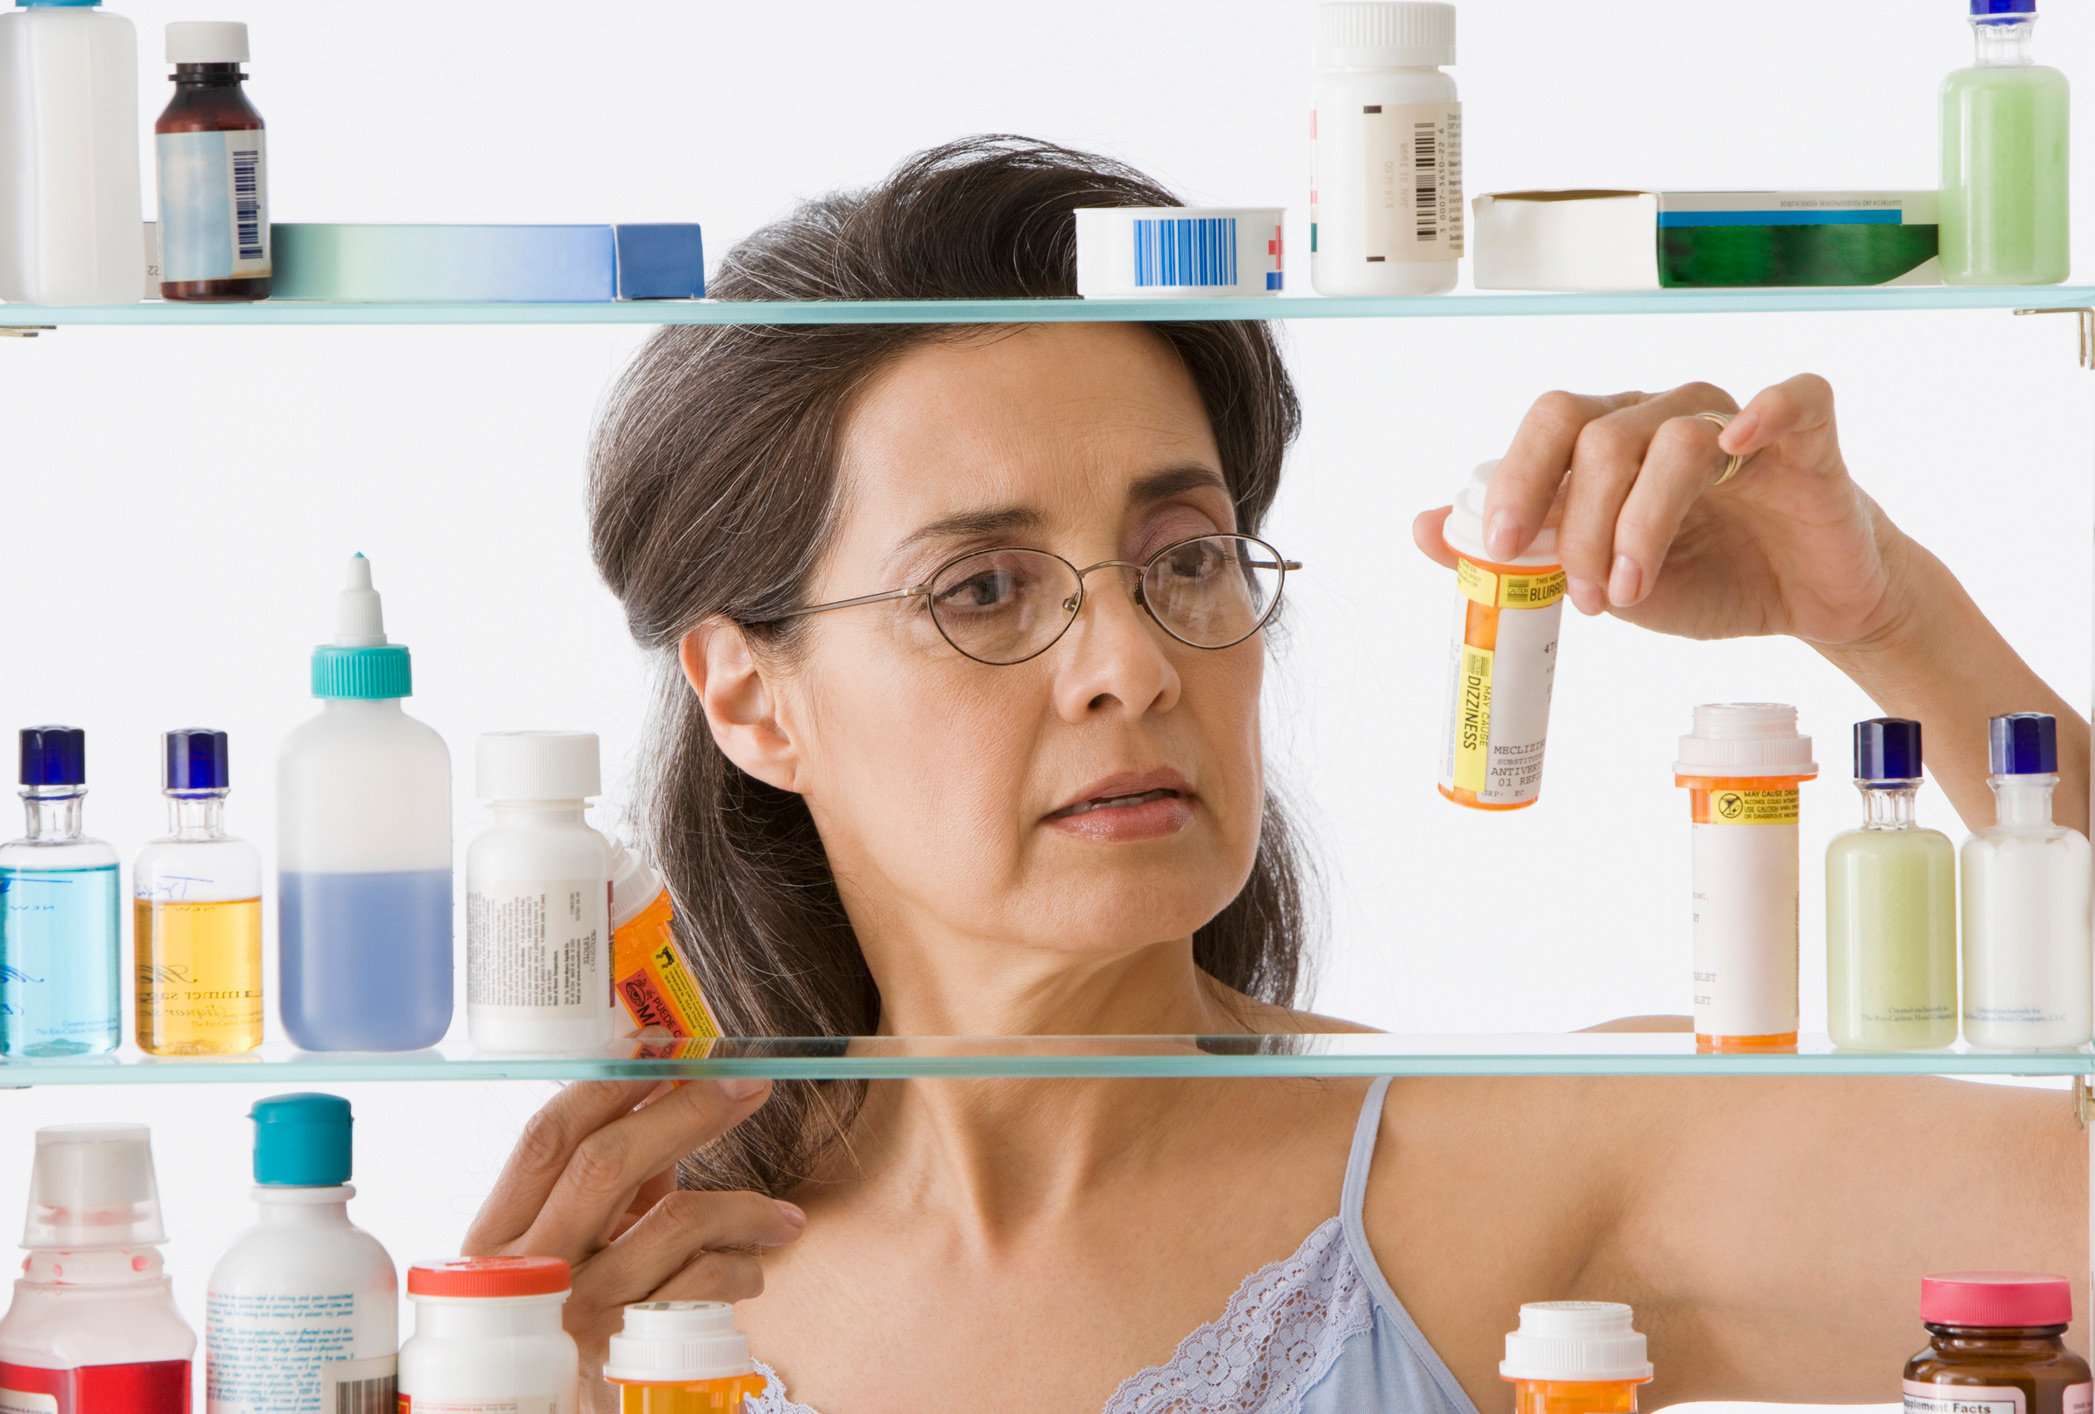 Woman figuring out how to dispose of medication.